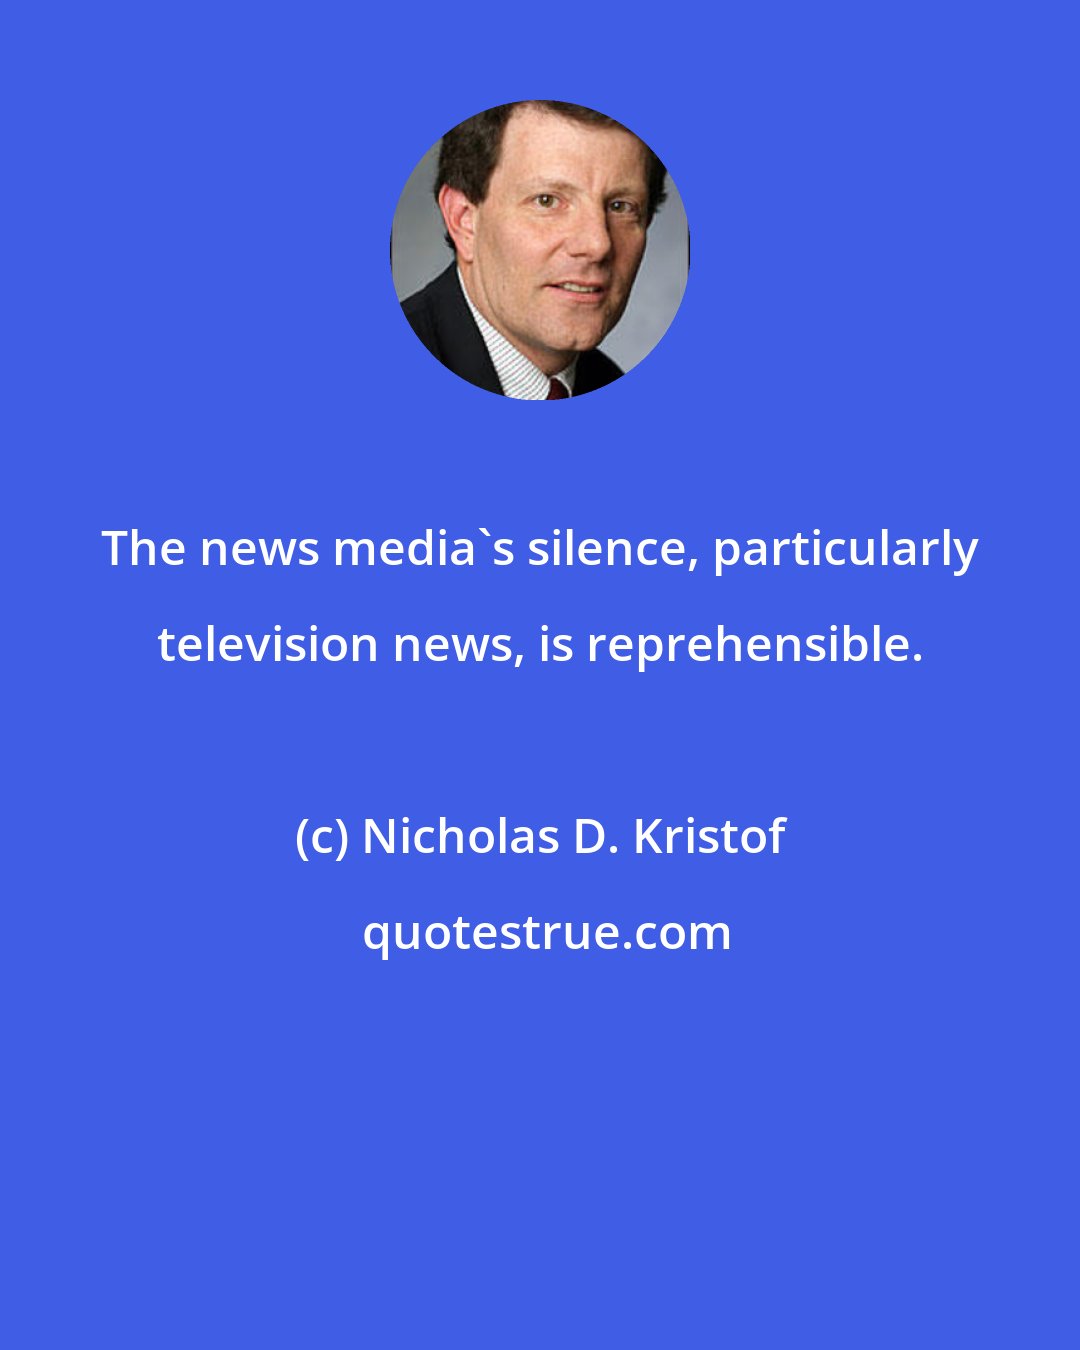 Nicholas D. Kristof: The news media's silence, particularly television news, is reprehensible.